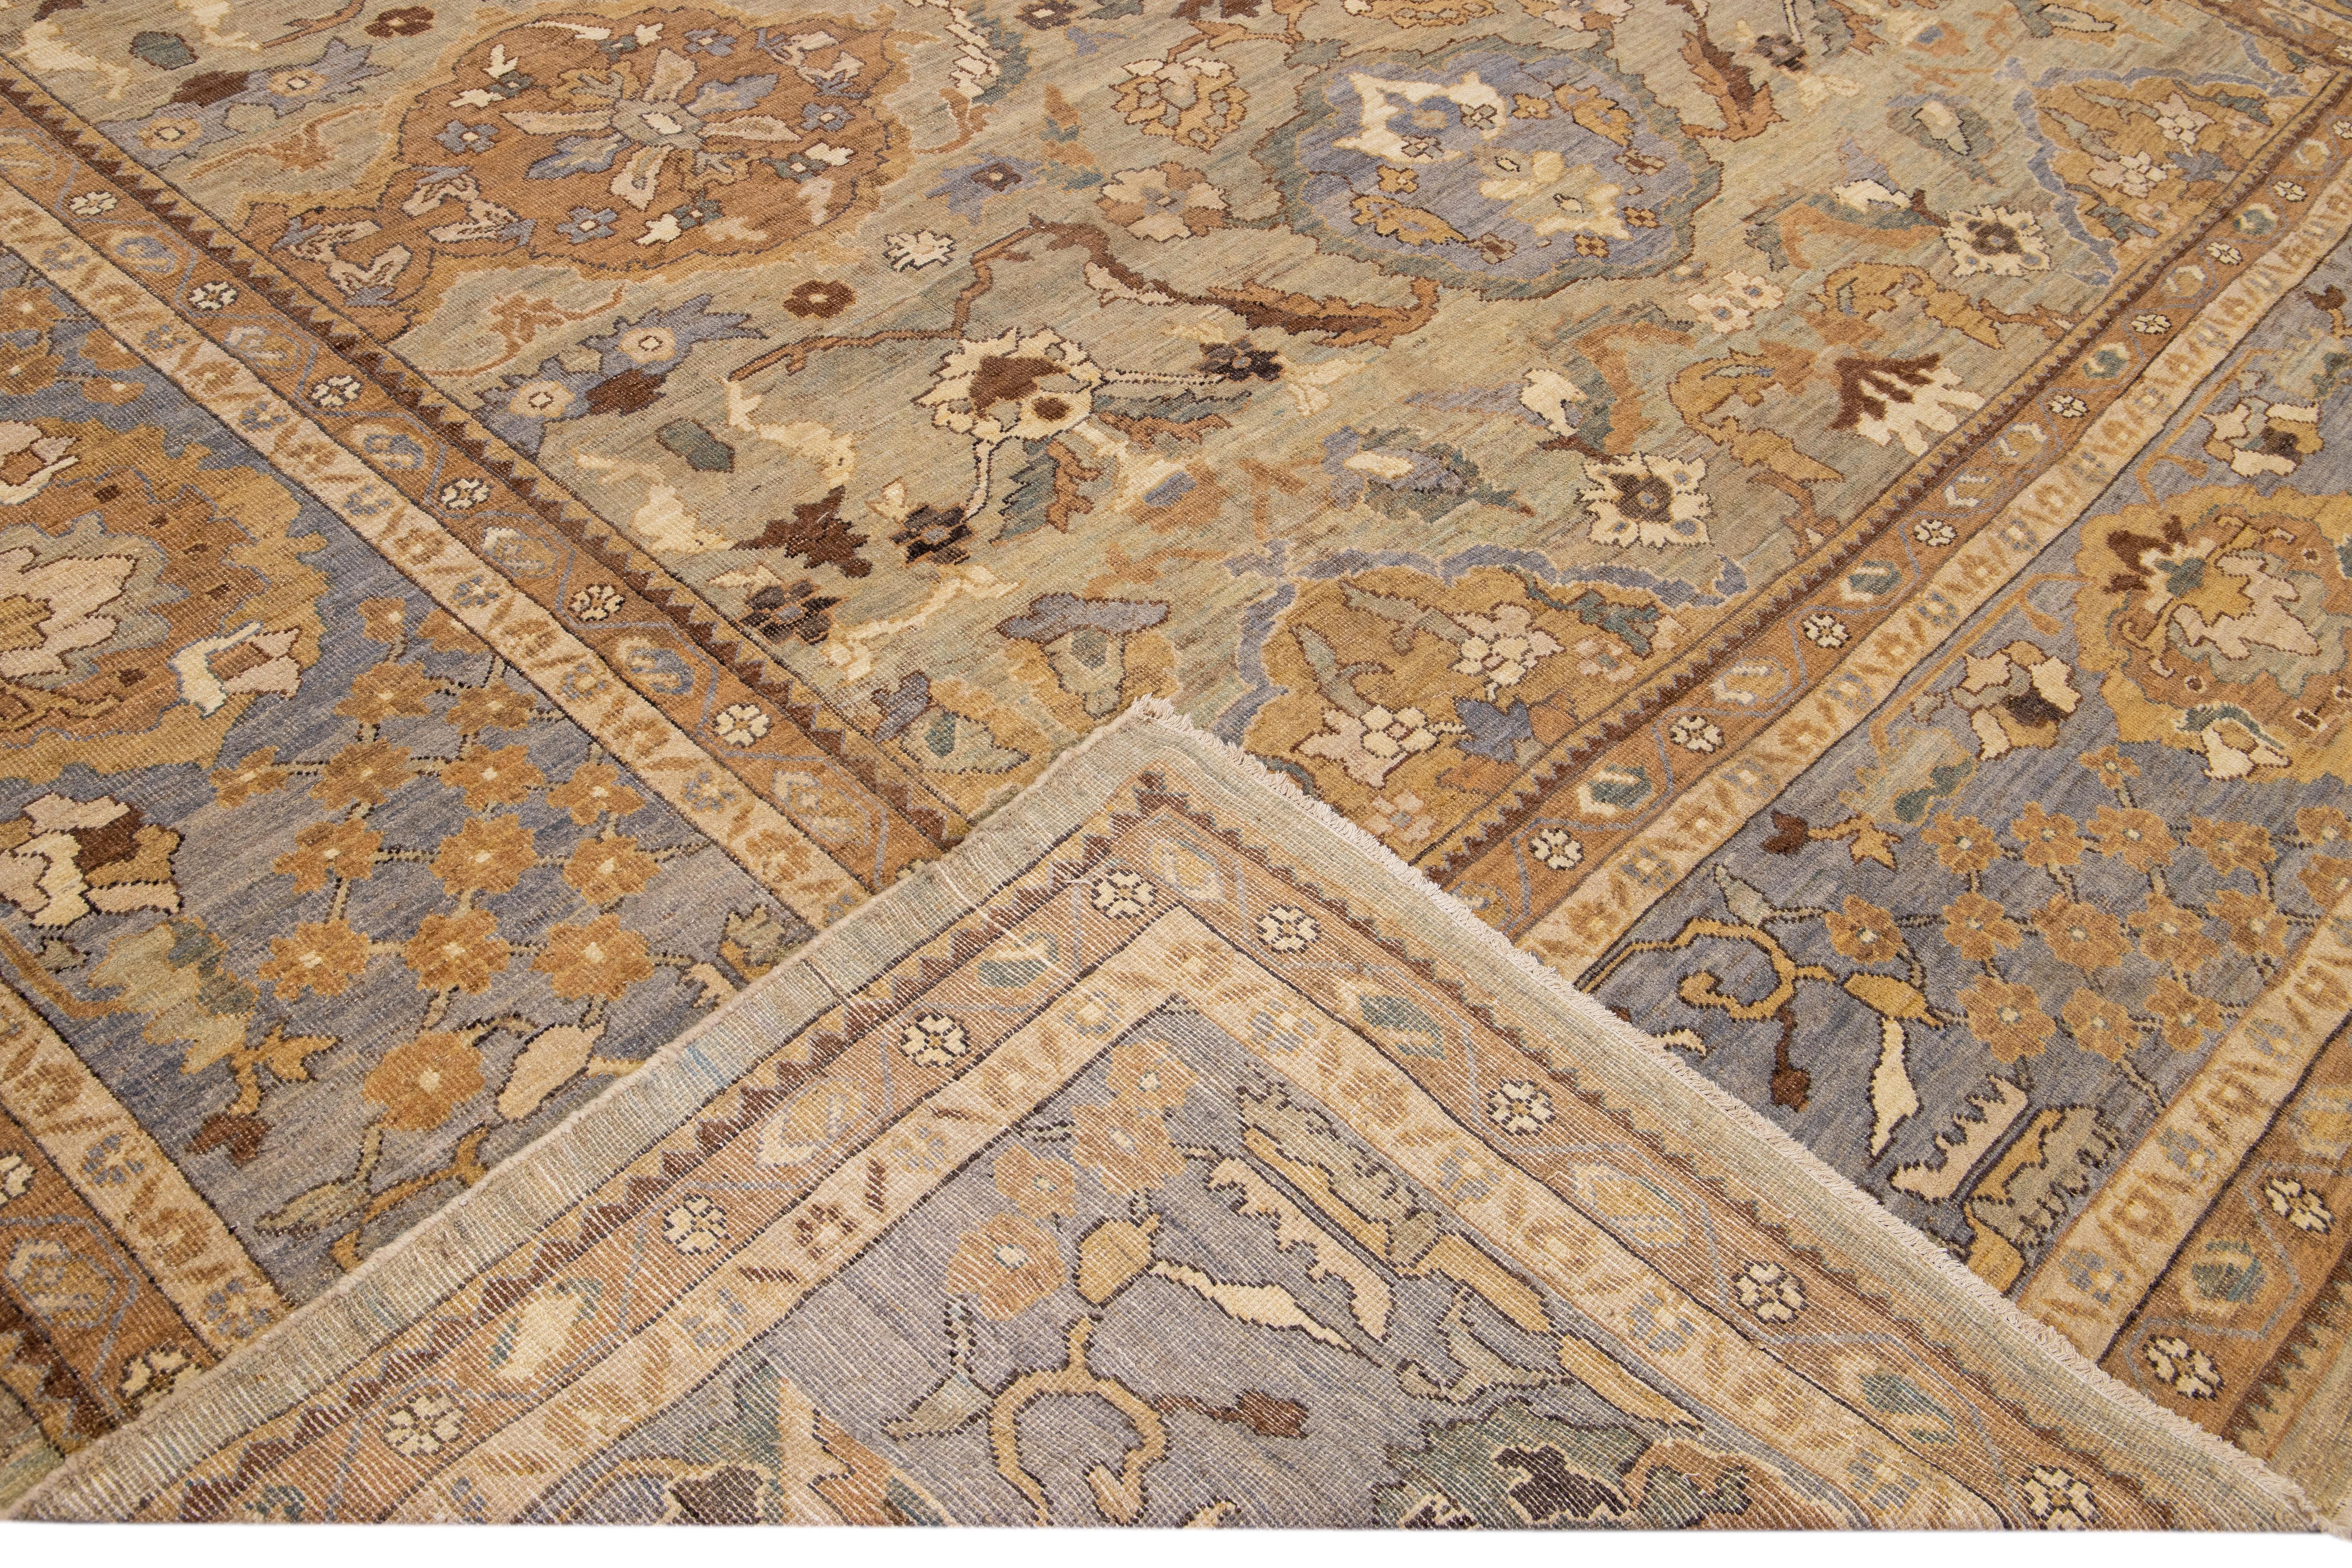 Beautiful modern Sultanabad hand-knotted wool rug with a beige field. This Sultanabad rug has a gray frame with beige, blue, brown, and goldenrod accent in a gorgeous all-over Classic floral pattern design.

This rug measures: 13' x 20'6